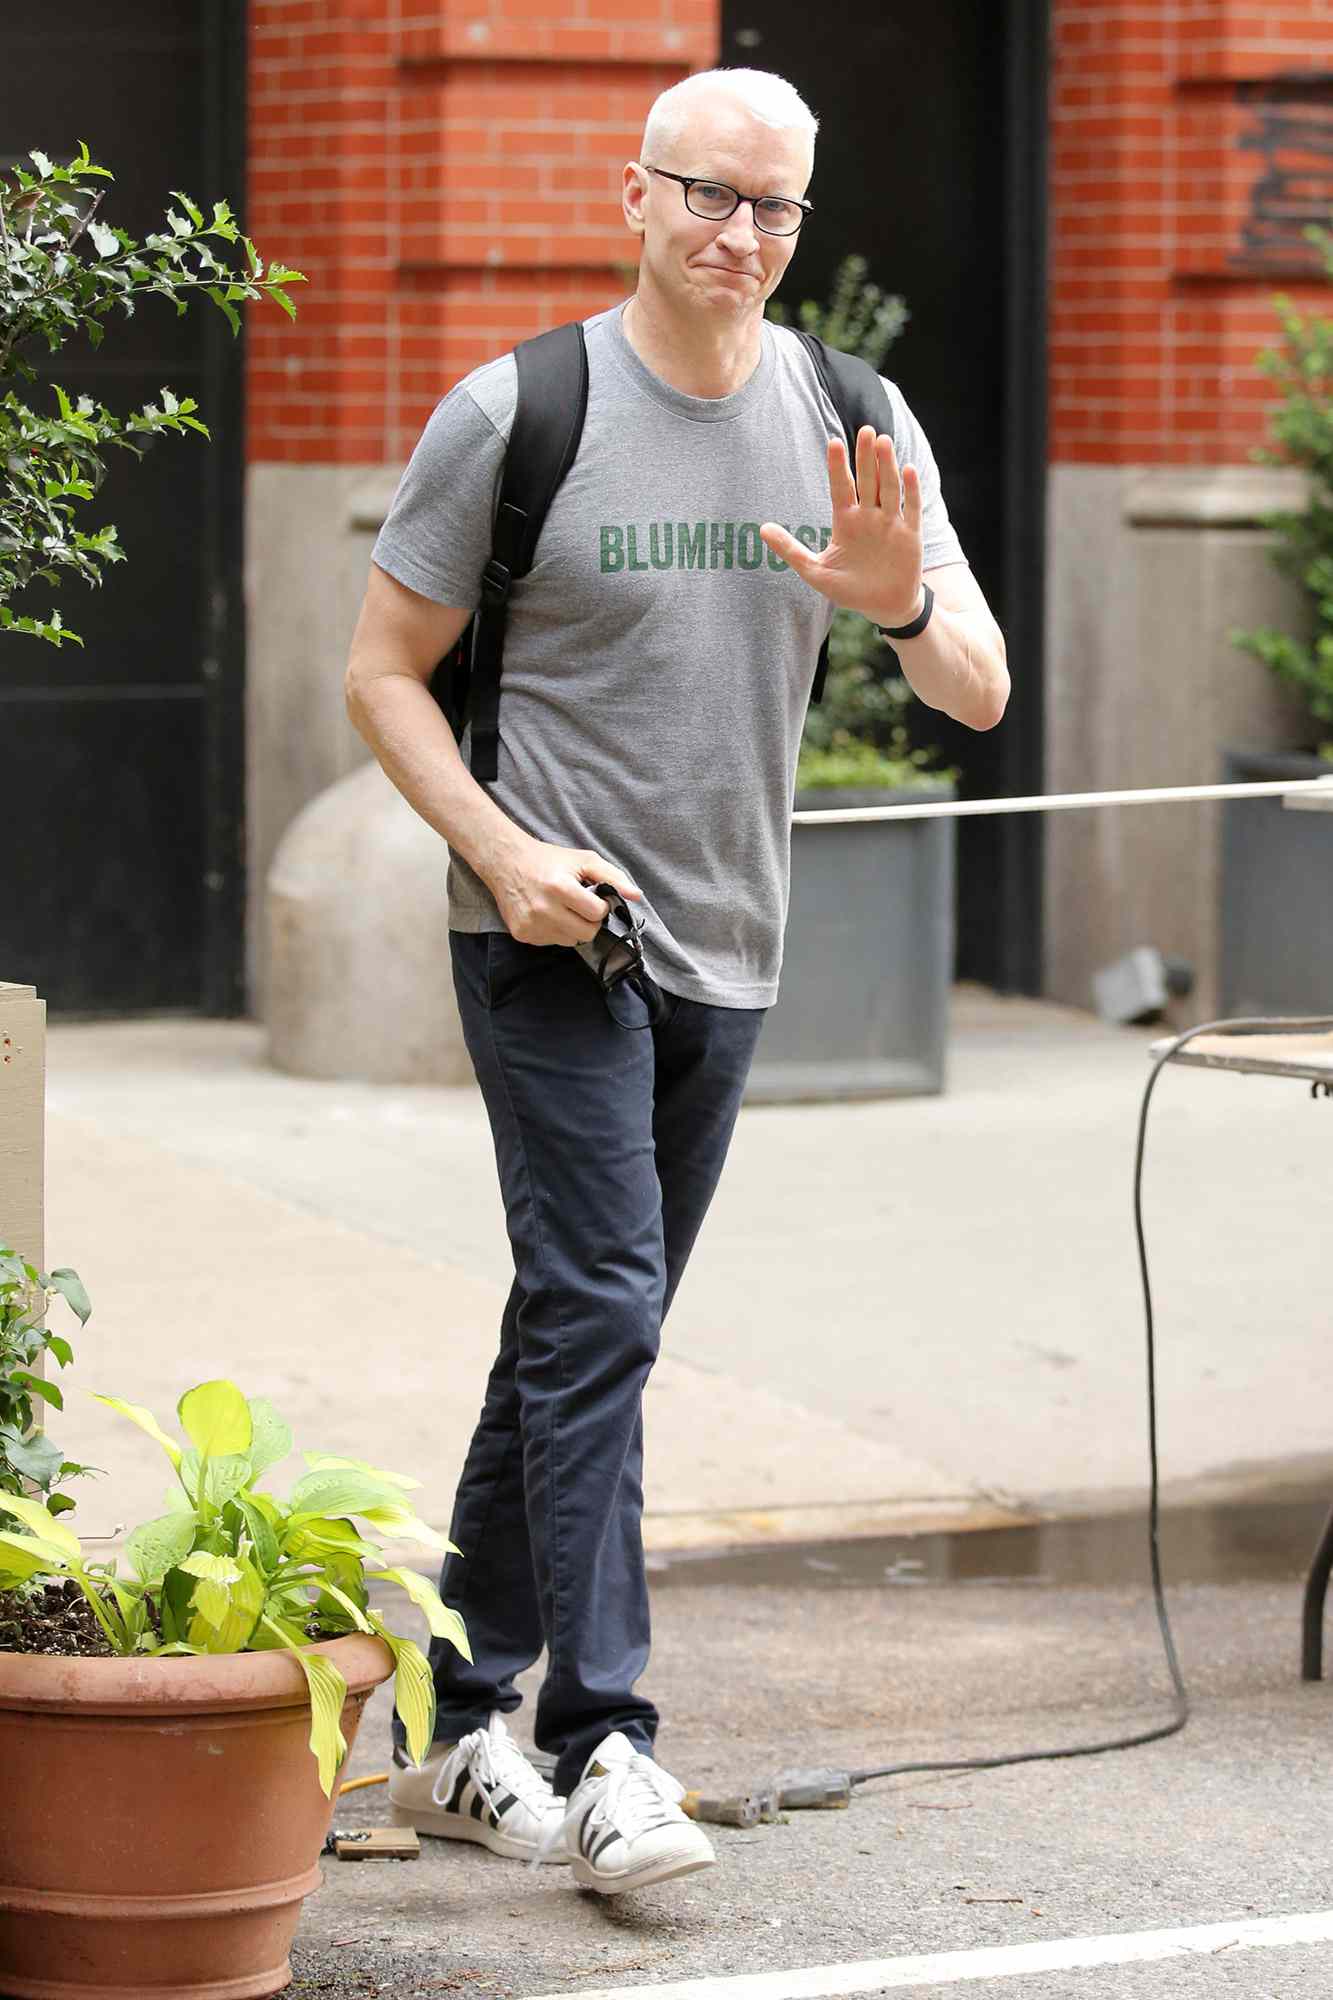 Anderson Cooper Celebrates His 54th Birthday By Heading Off To Work In New York City